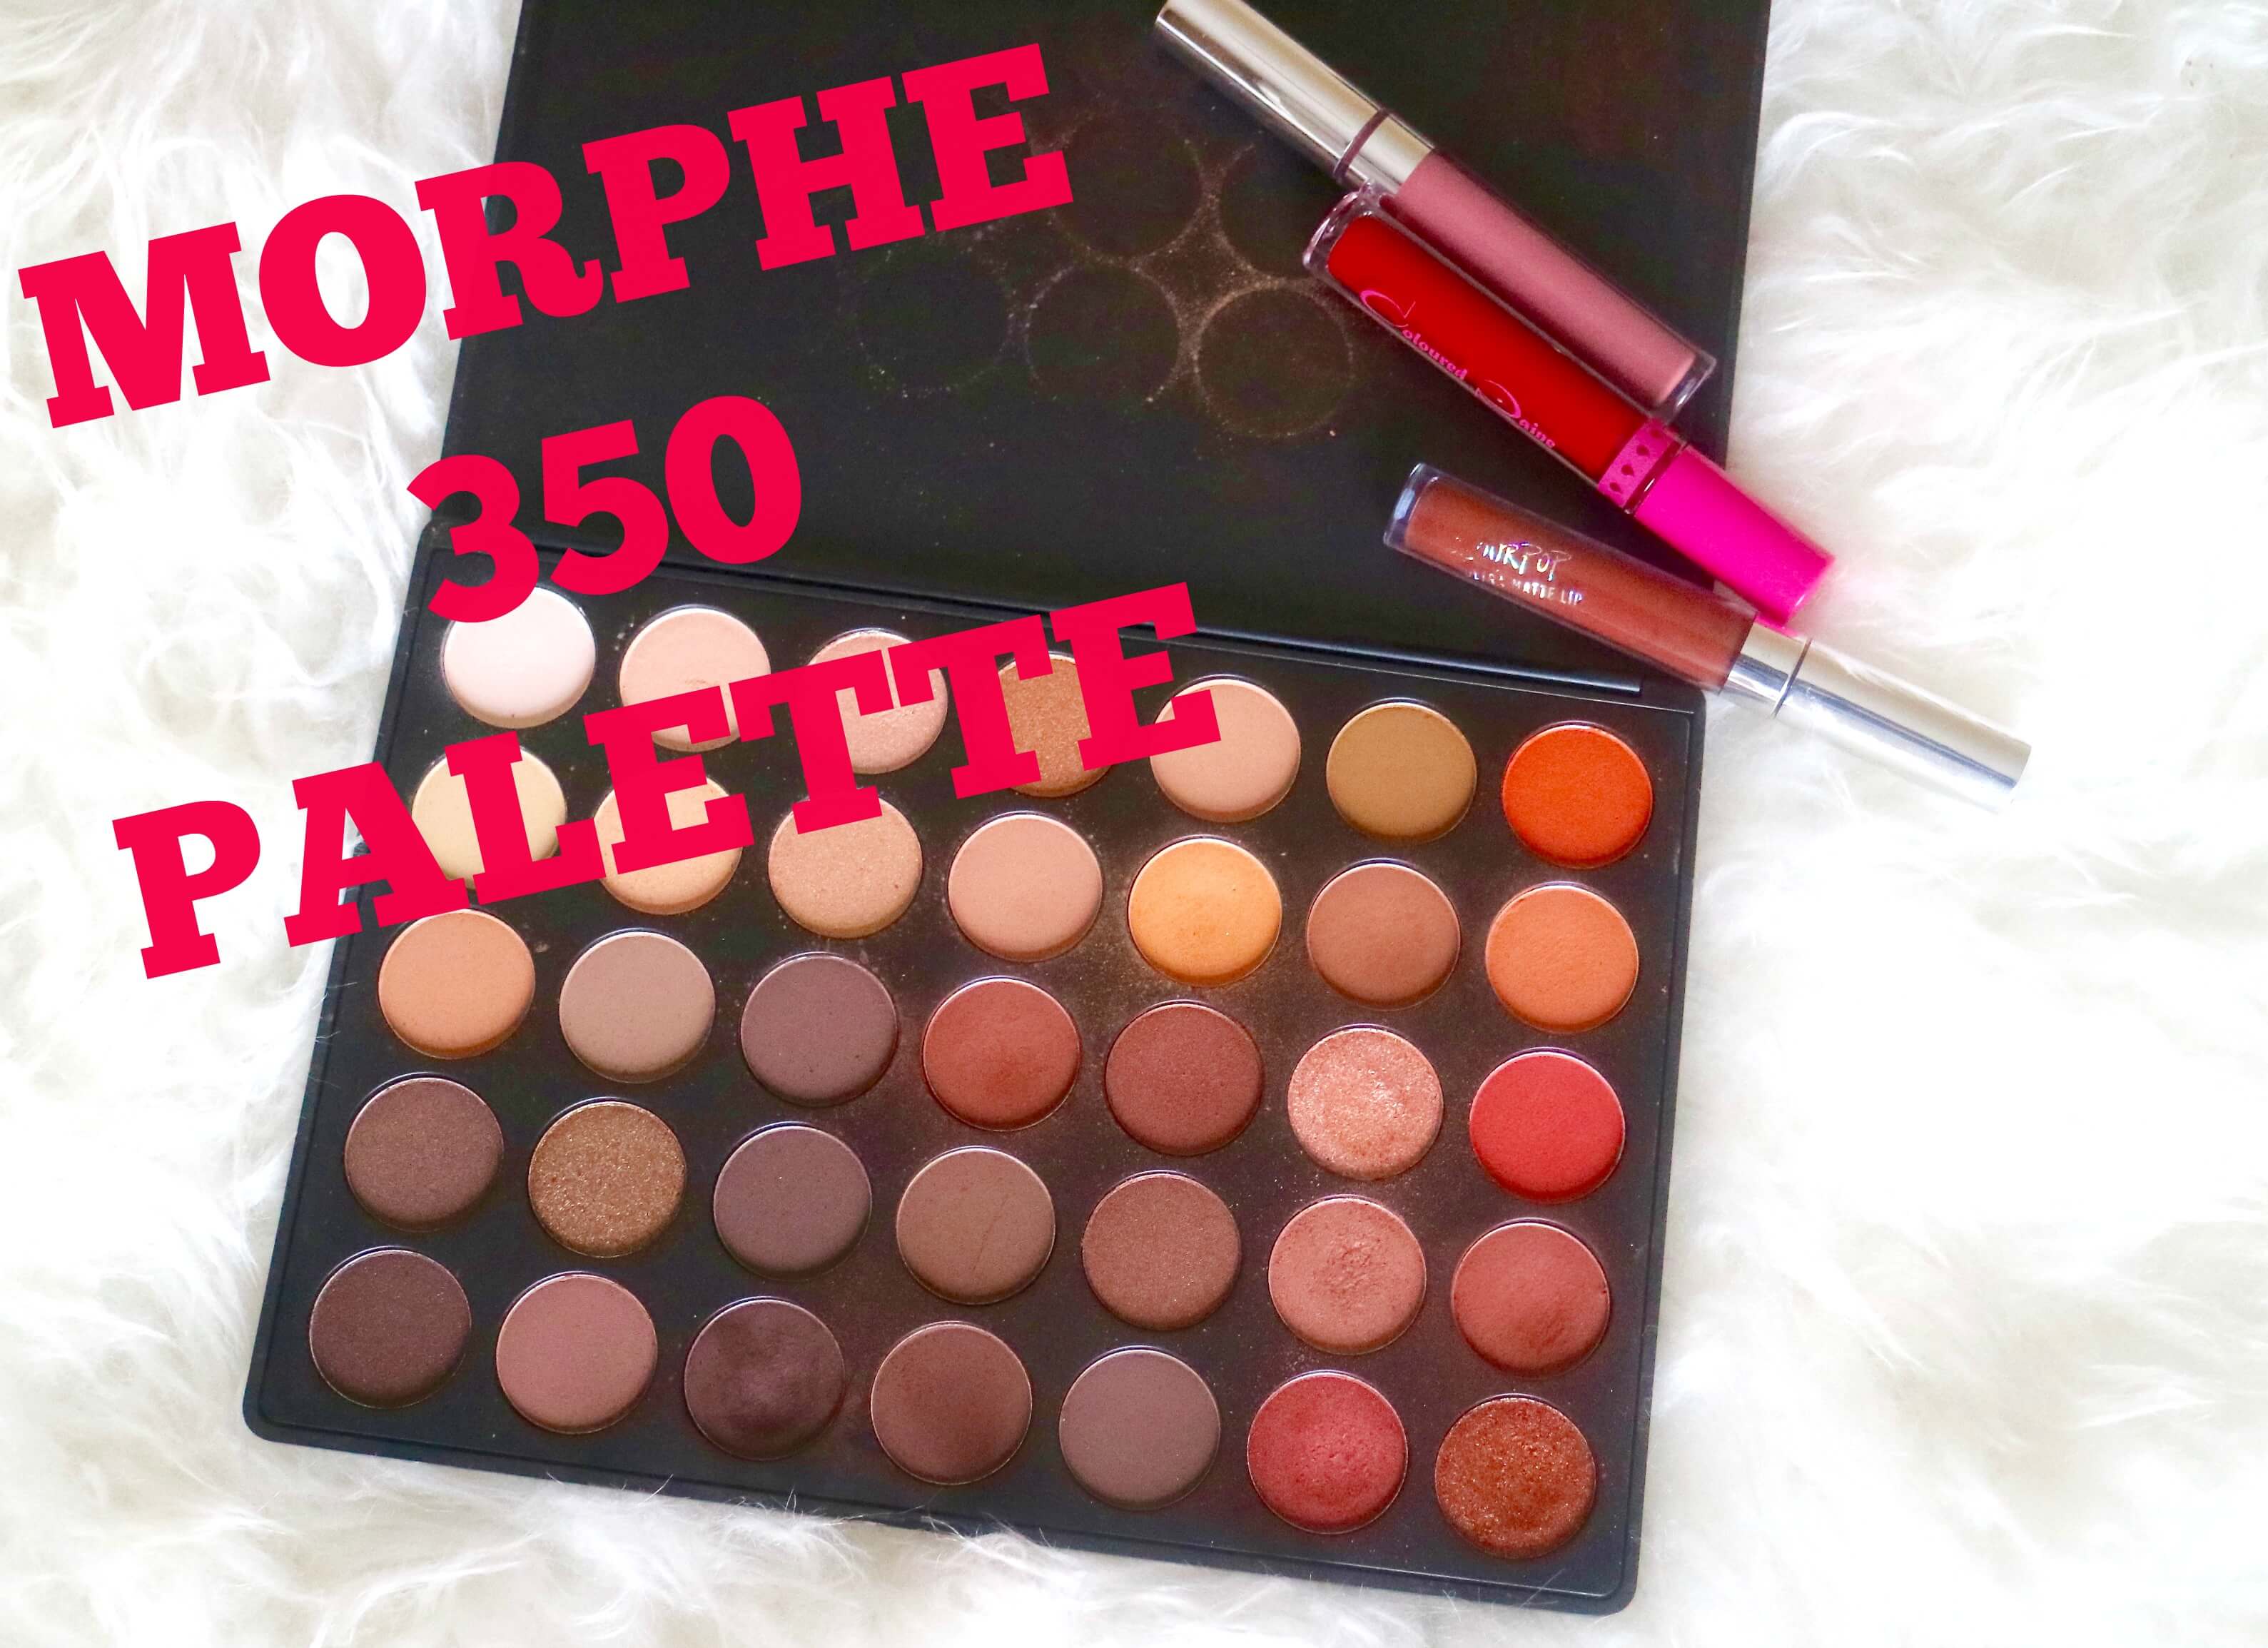 MORPHE 35O PALETTE WITH SWATCHES